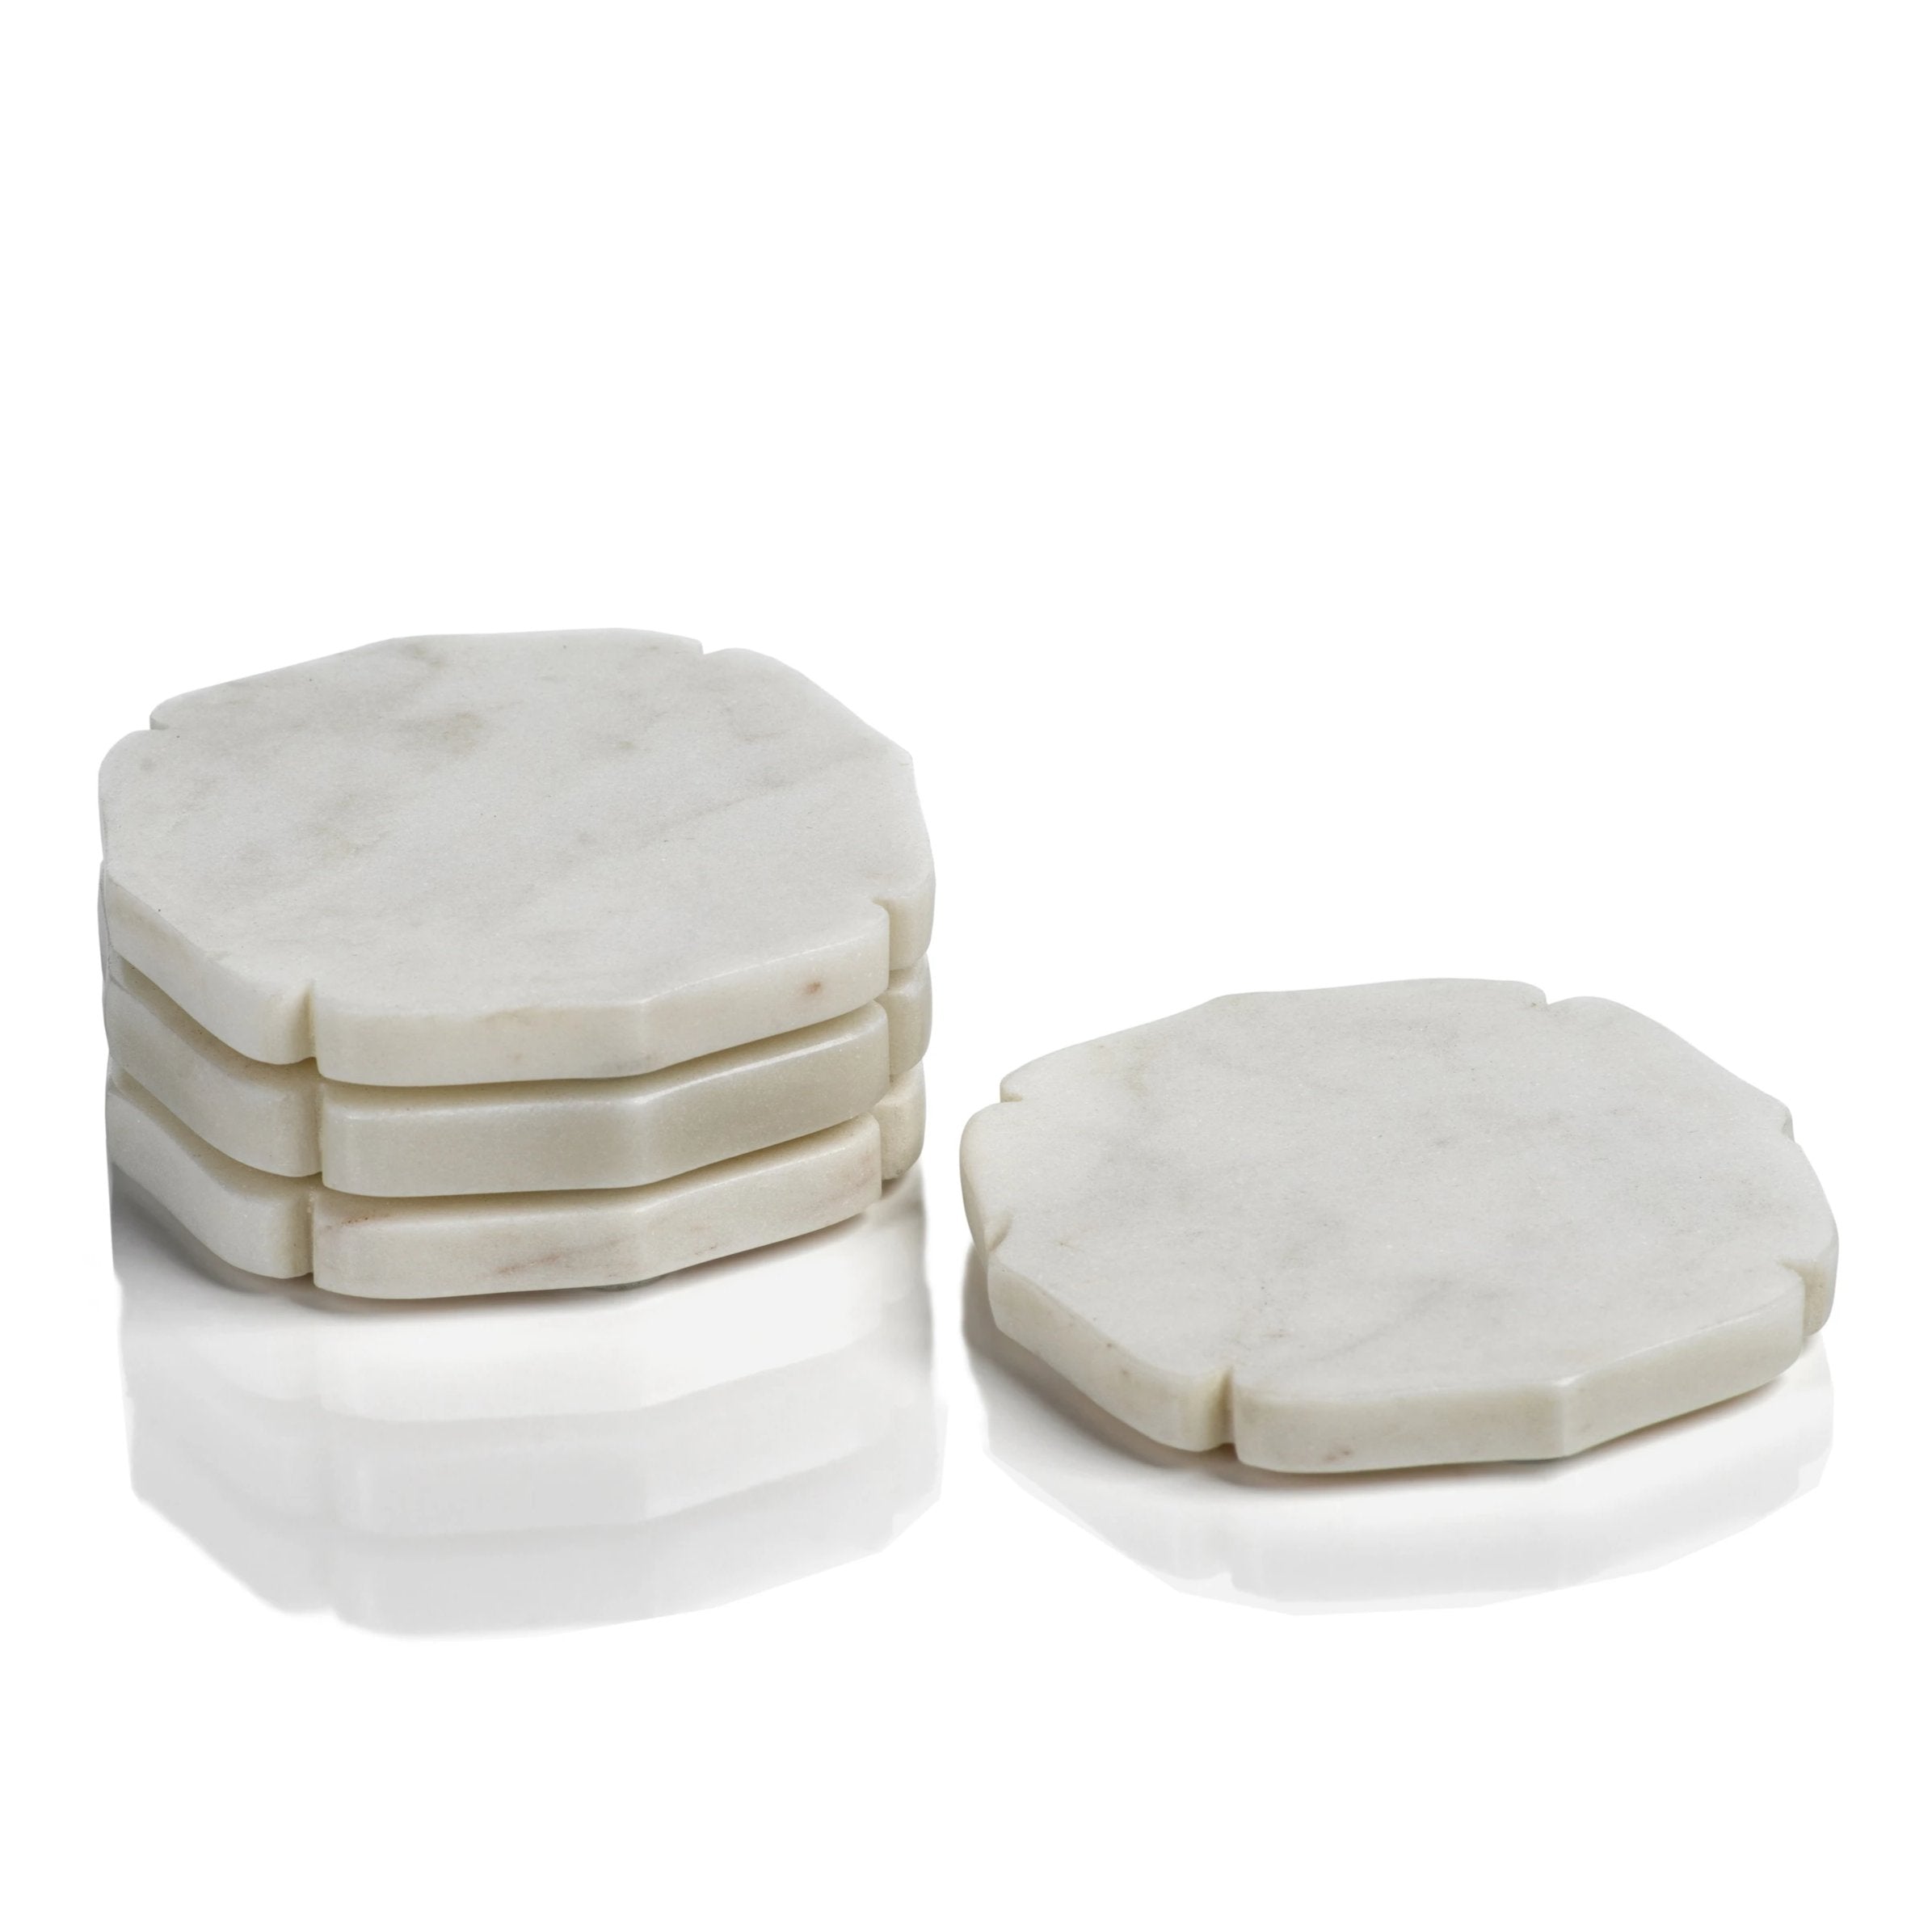 Set of 4 White Marble Coasters - CARLYLE AVENUE